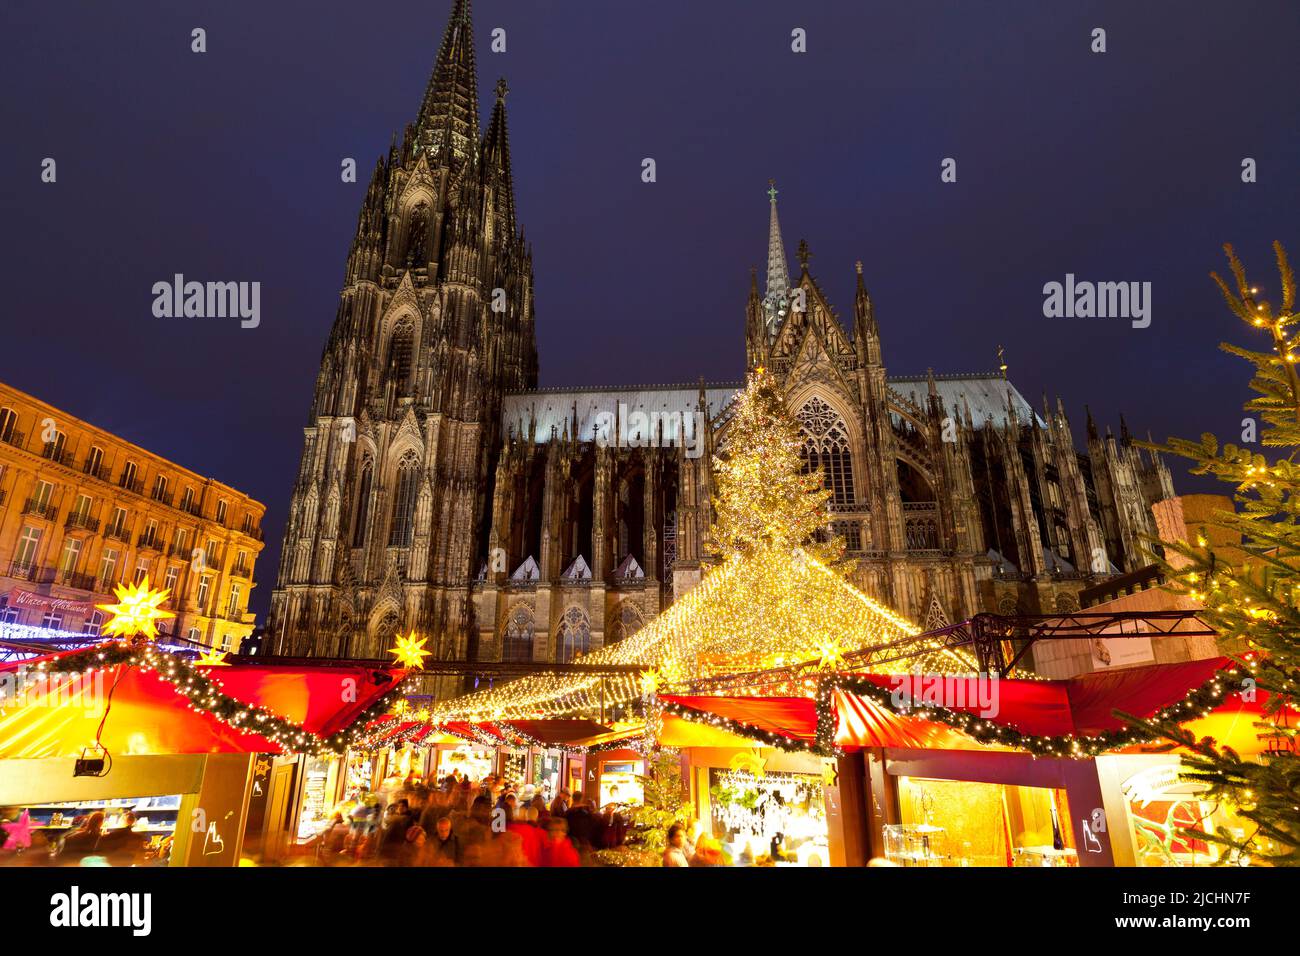 Christmas Market beneath Cologne Cathedral, Cologne, North Rhine-Westphalia, Germany Stock Photo